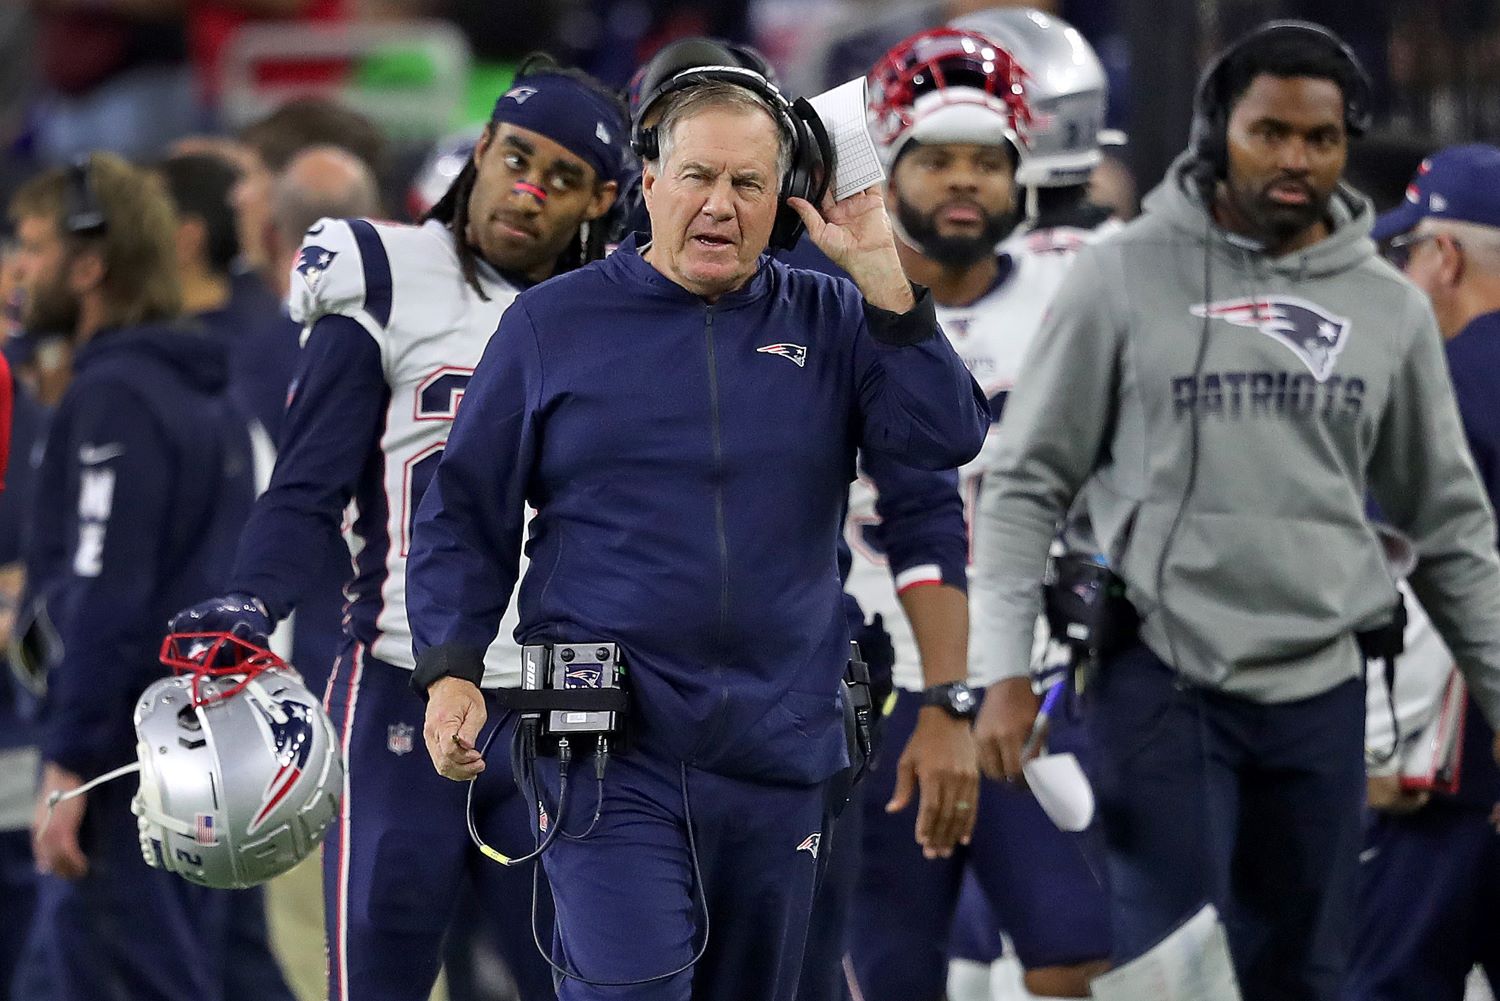 With Stephon Gilmore reportedly putting his house for sale, Bill Belichick just lost any trade leverage for the Patriots' star cornerback.